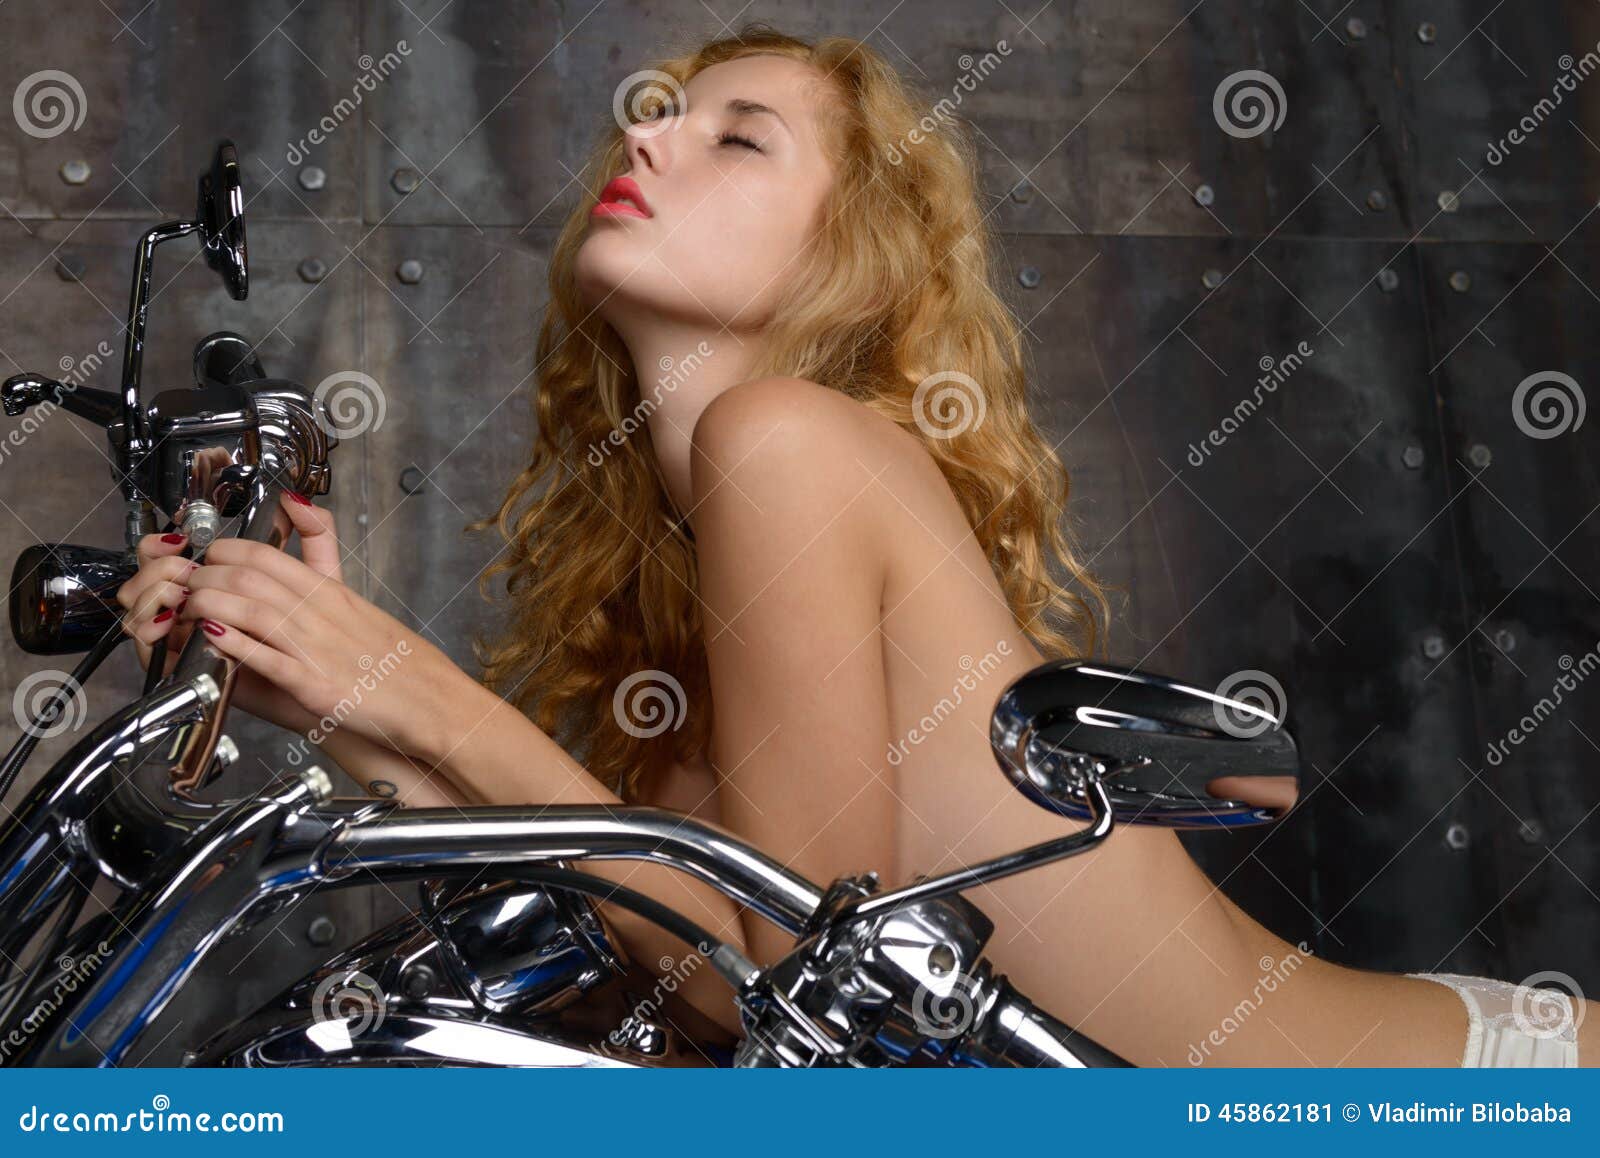 nude babes and motorcycles